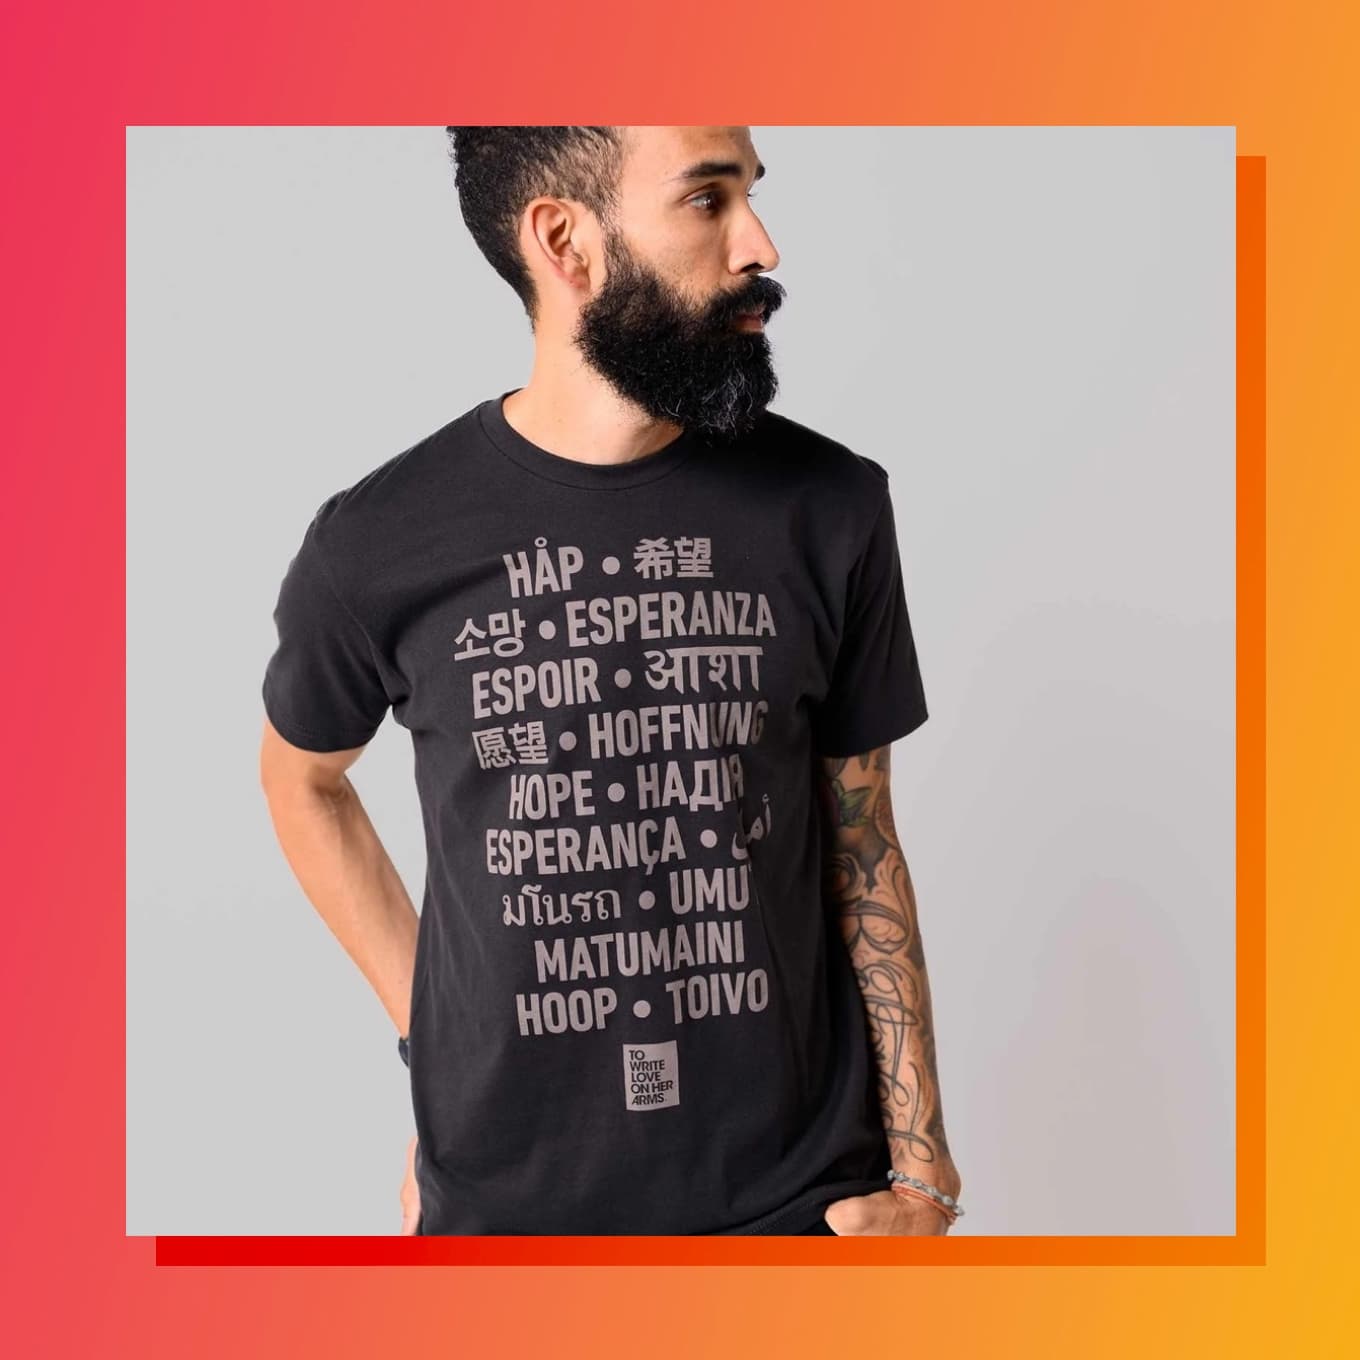 Shirt that says HOPE in many languages